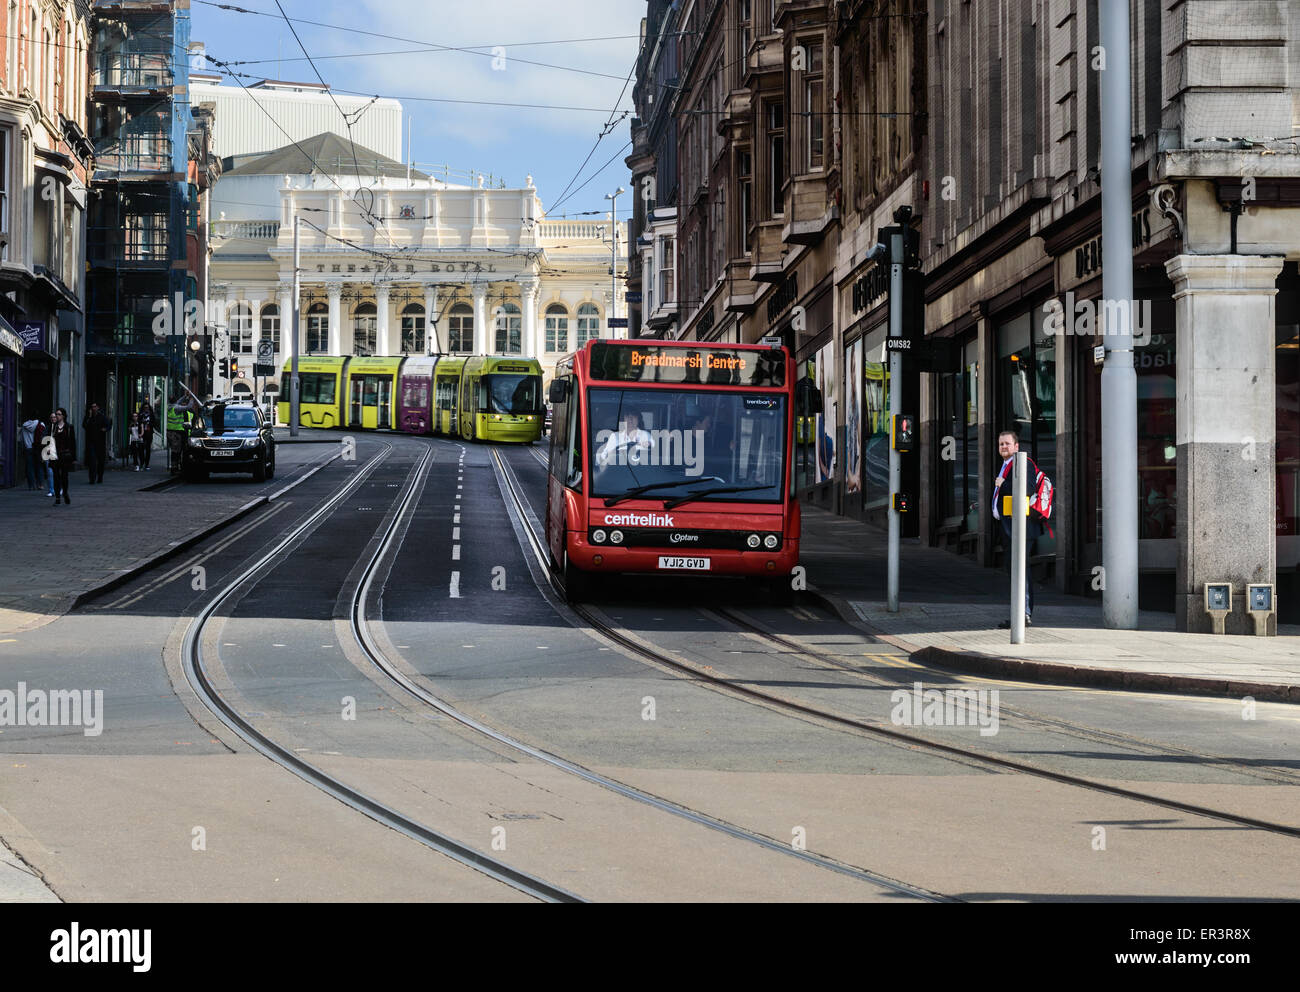 A Nottingham NET tram behind a red 'Trent' bus, on Market Street, in Nottingham, England. Stock Photo